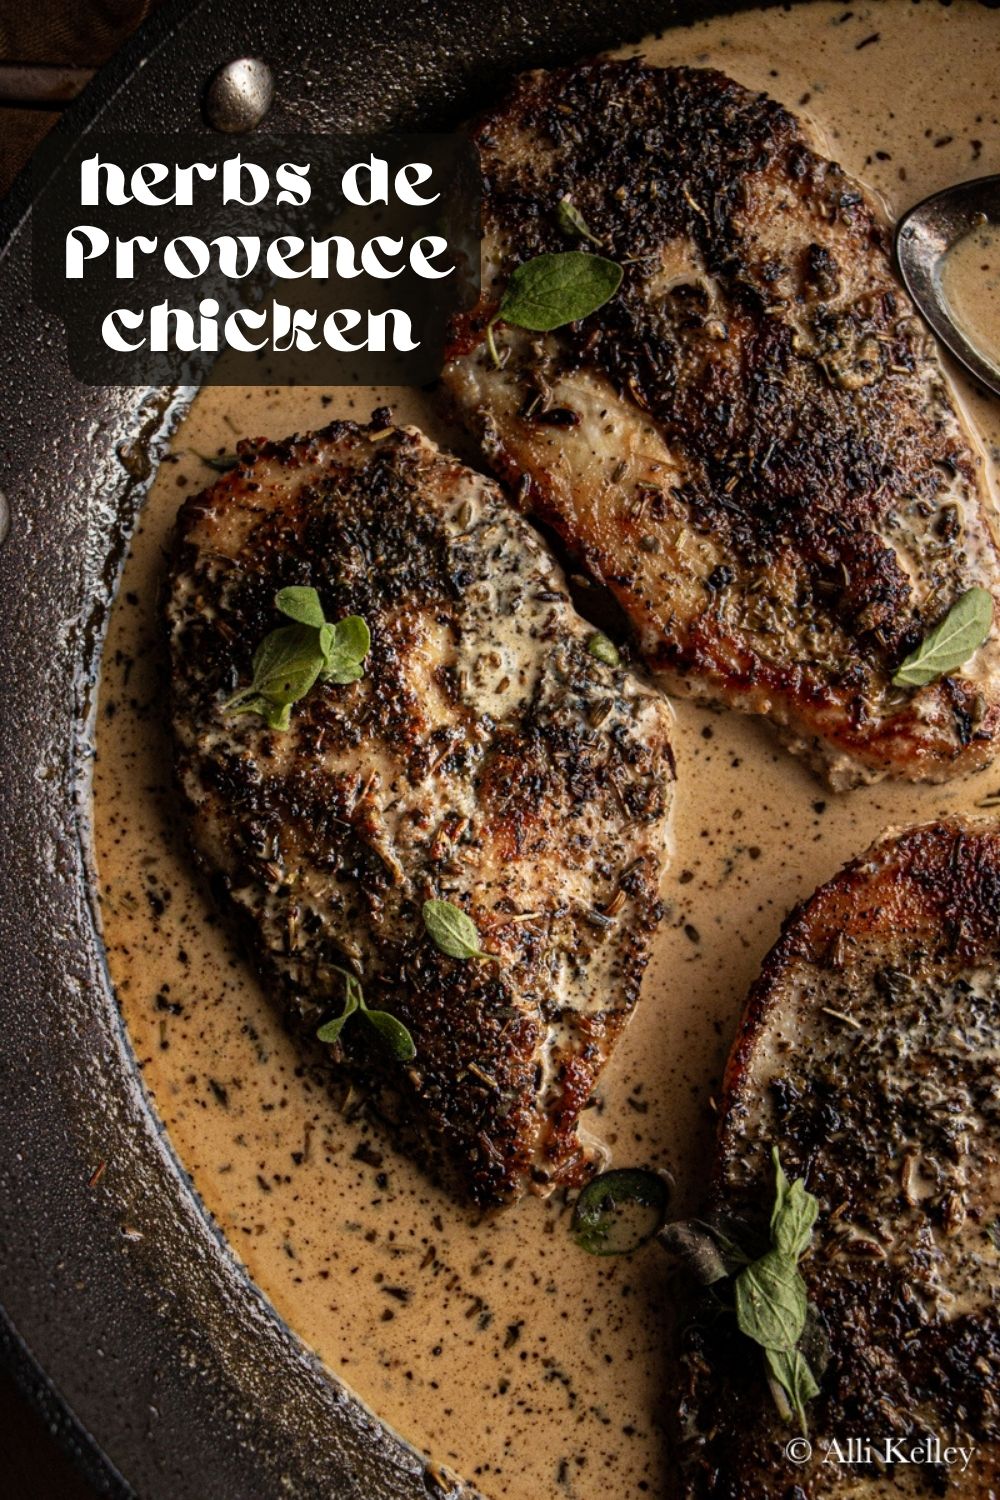 The crisp herbed coating and creamy sauce truly make my Herbs de Provence chicken unforgettable! Perfect for when you want a restaurant-quality meal without leaving the house - you won't believe how quick and easy this recipe is. Try doubling up the ingredients so you can enjoy leftovers the next day!